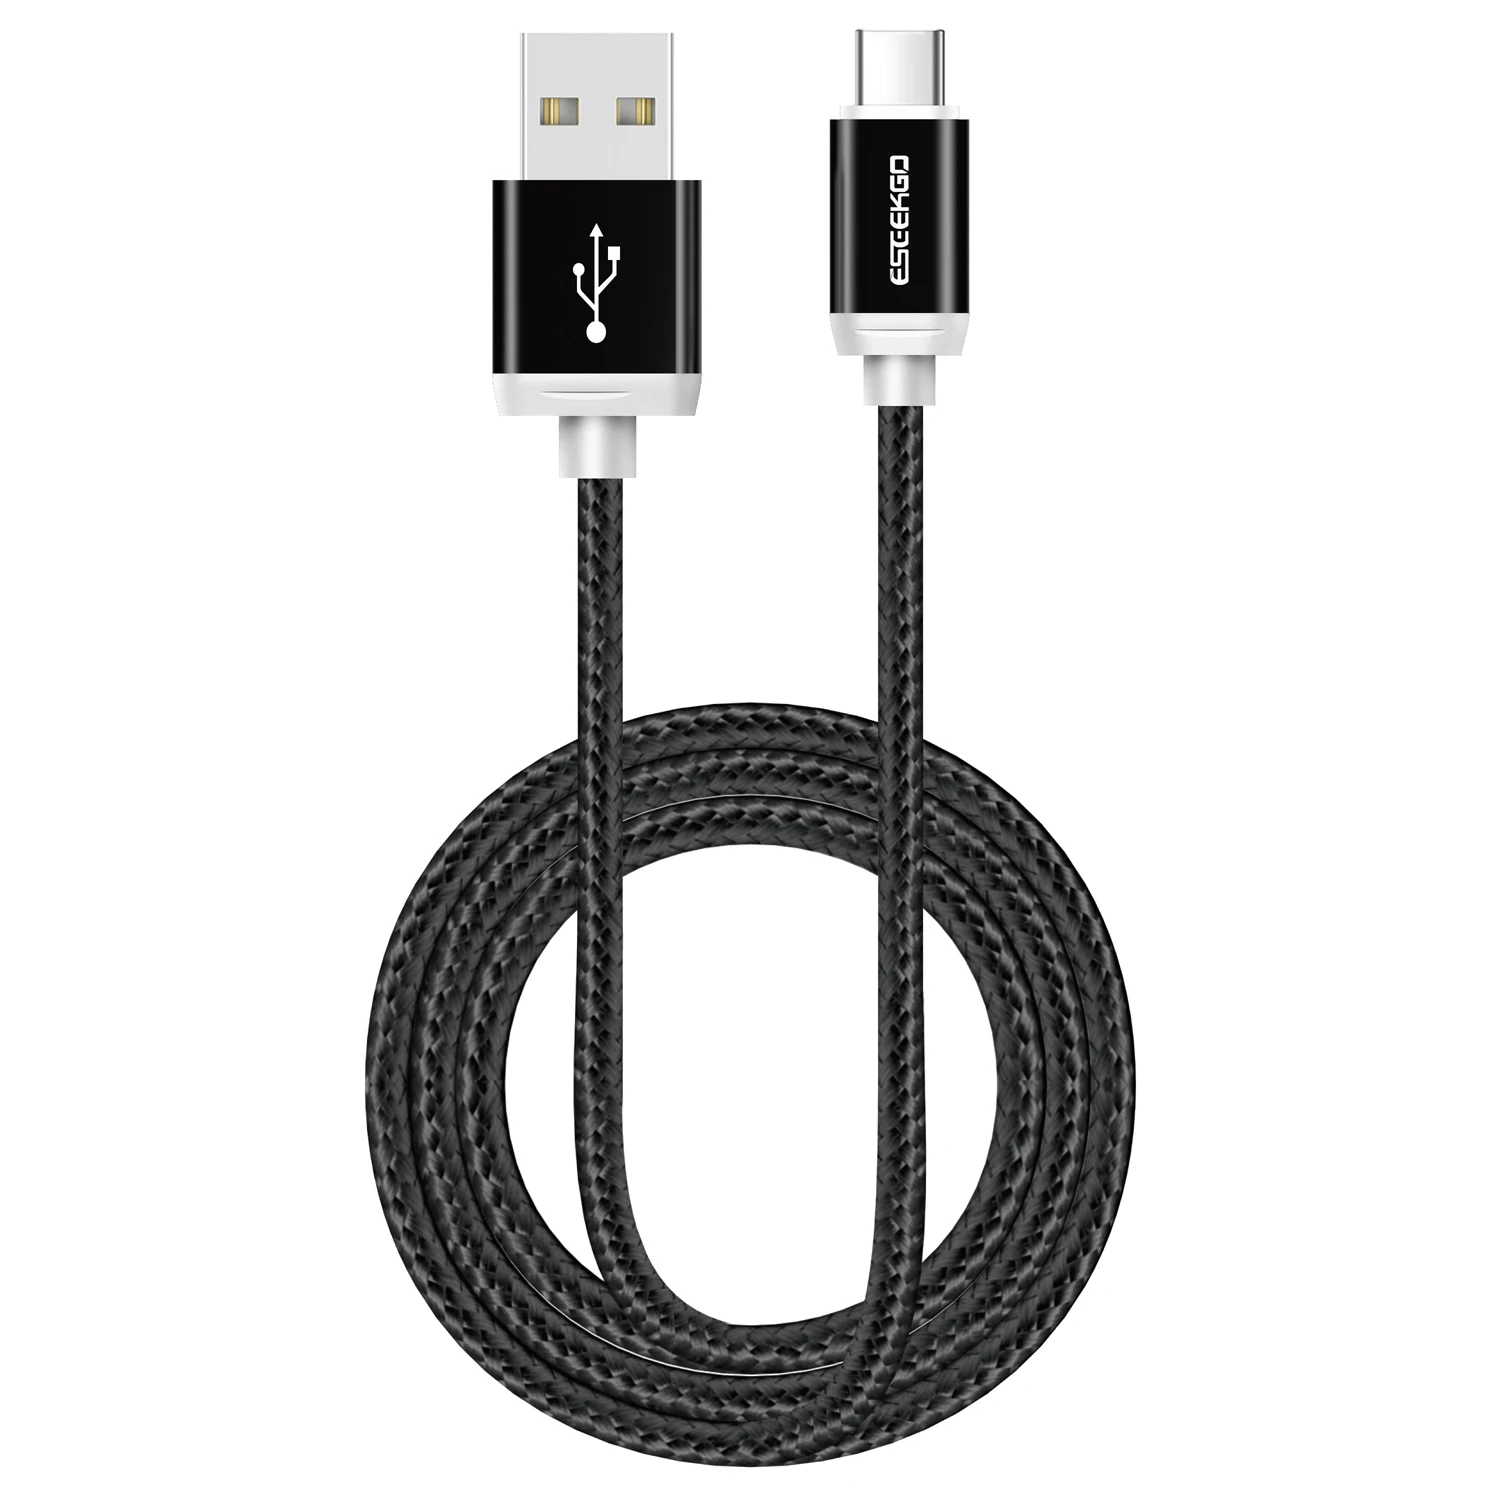 Micro USB Cable 1M for Android Cellphone,sync Data and Charge,Fast Charge 2.1A,Black 